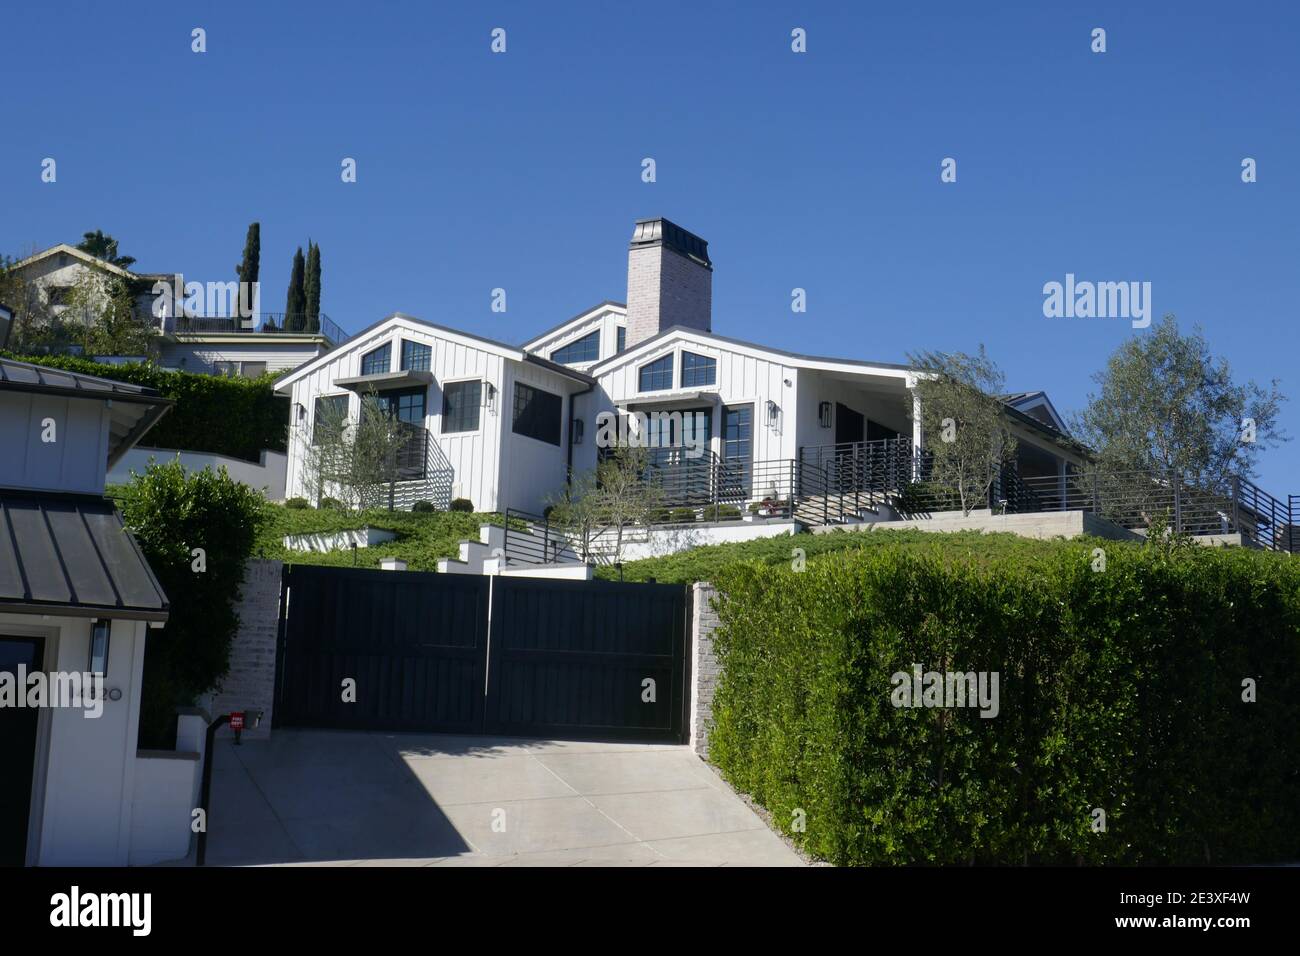 Sherman Oaks, California, USA 20th January 2021 A general view of atmosphere of former home of actor Richard Dreyfuss and former home of actress Didi Conn, now home of Reality Television's Jeff Lewis at 14820 Valley Vista Blvd on January 20, 2021 in Sherman Oaks, California, USA. Photo by Barry King/Alamy Stock Photo Stock Photo